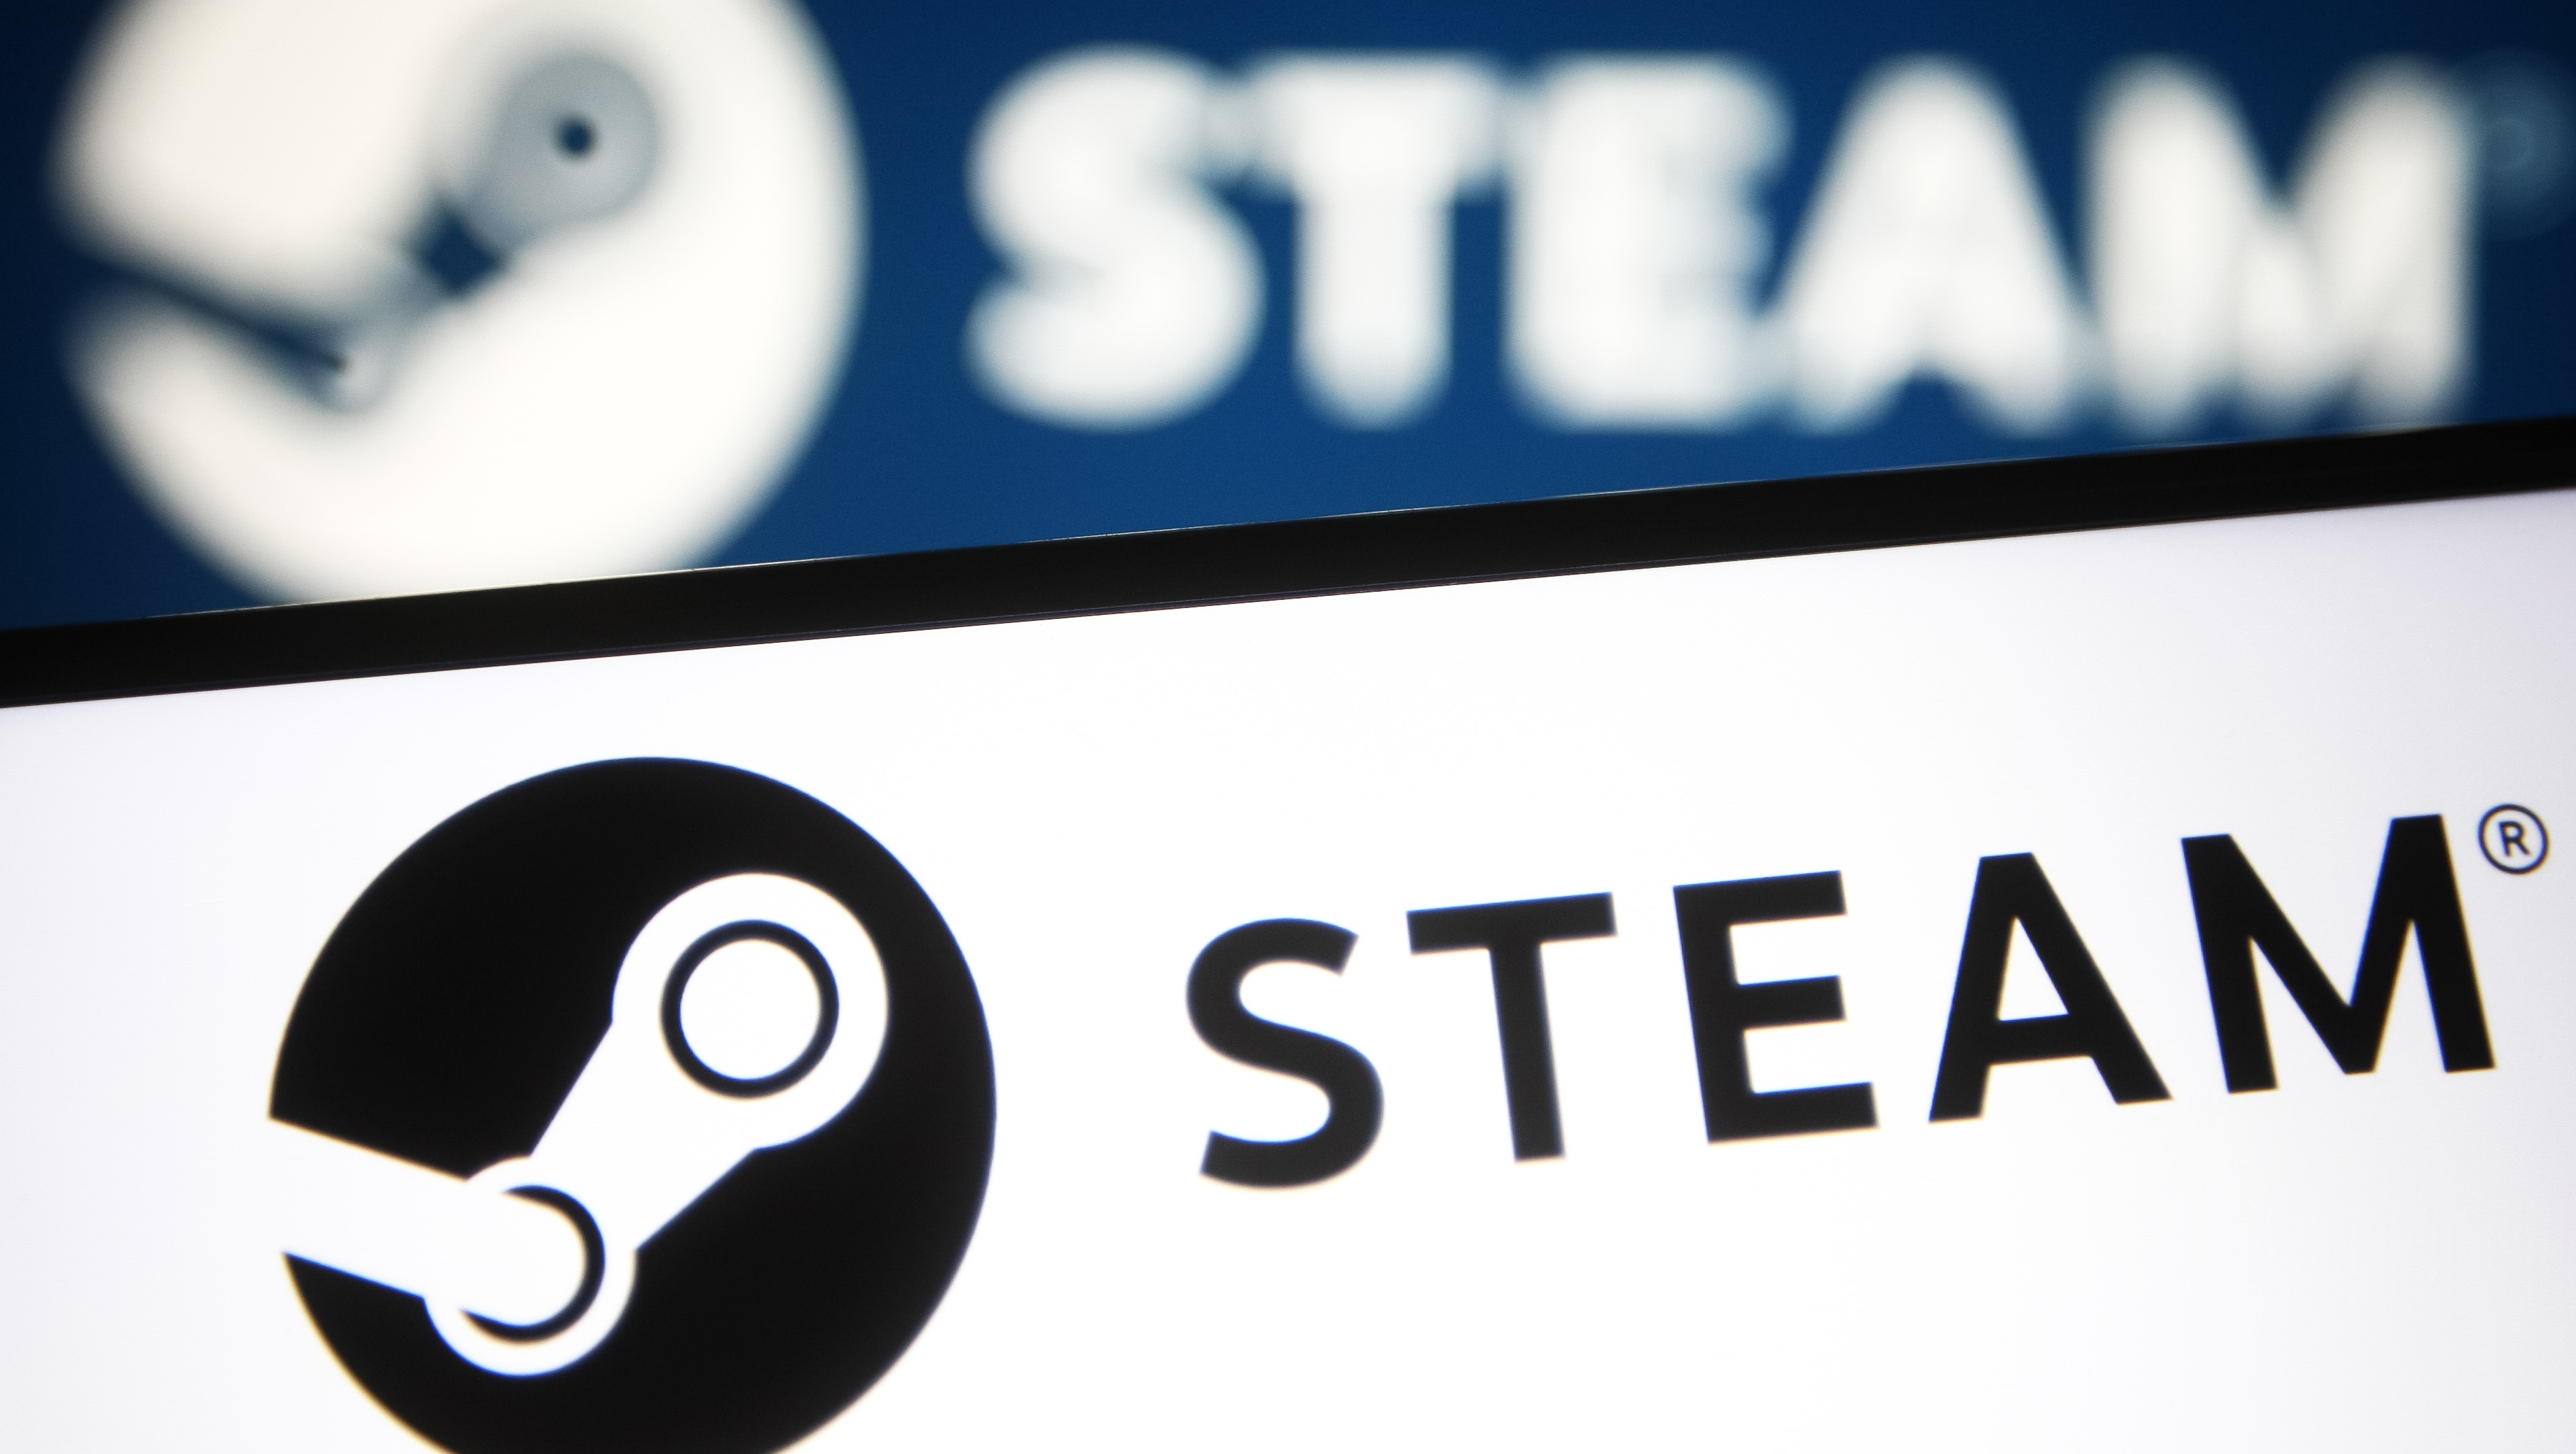 illustration a Steam logo of a video game digital distribution service is seen on a smartphone and a pc screen.